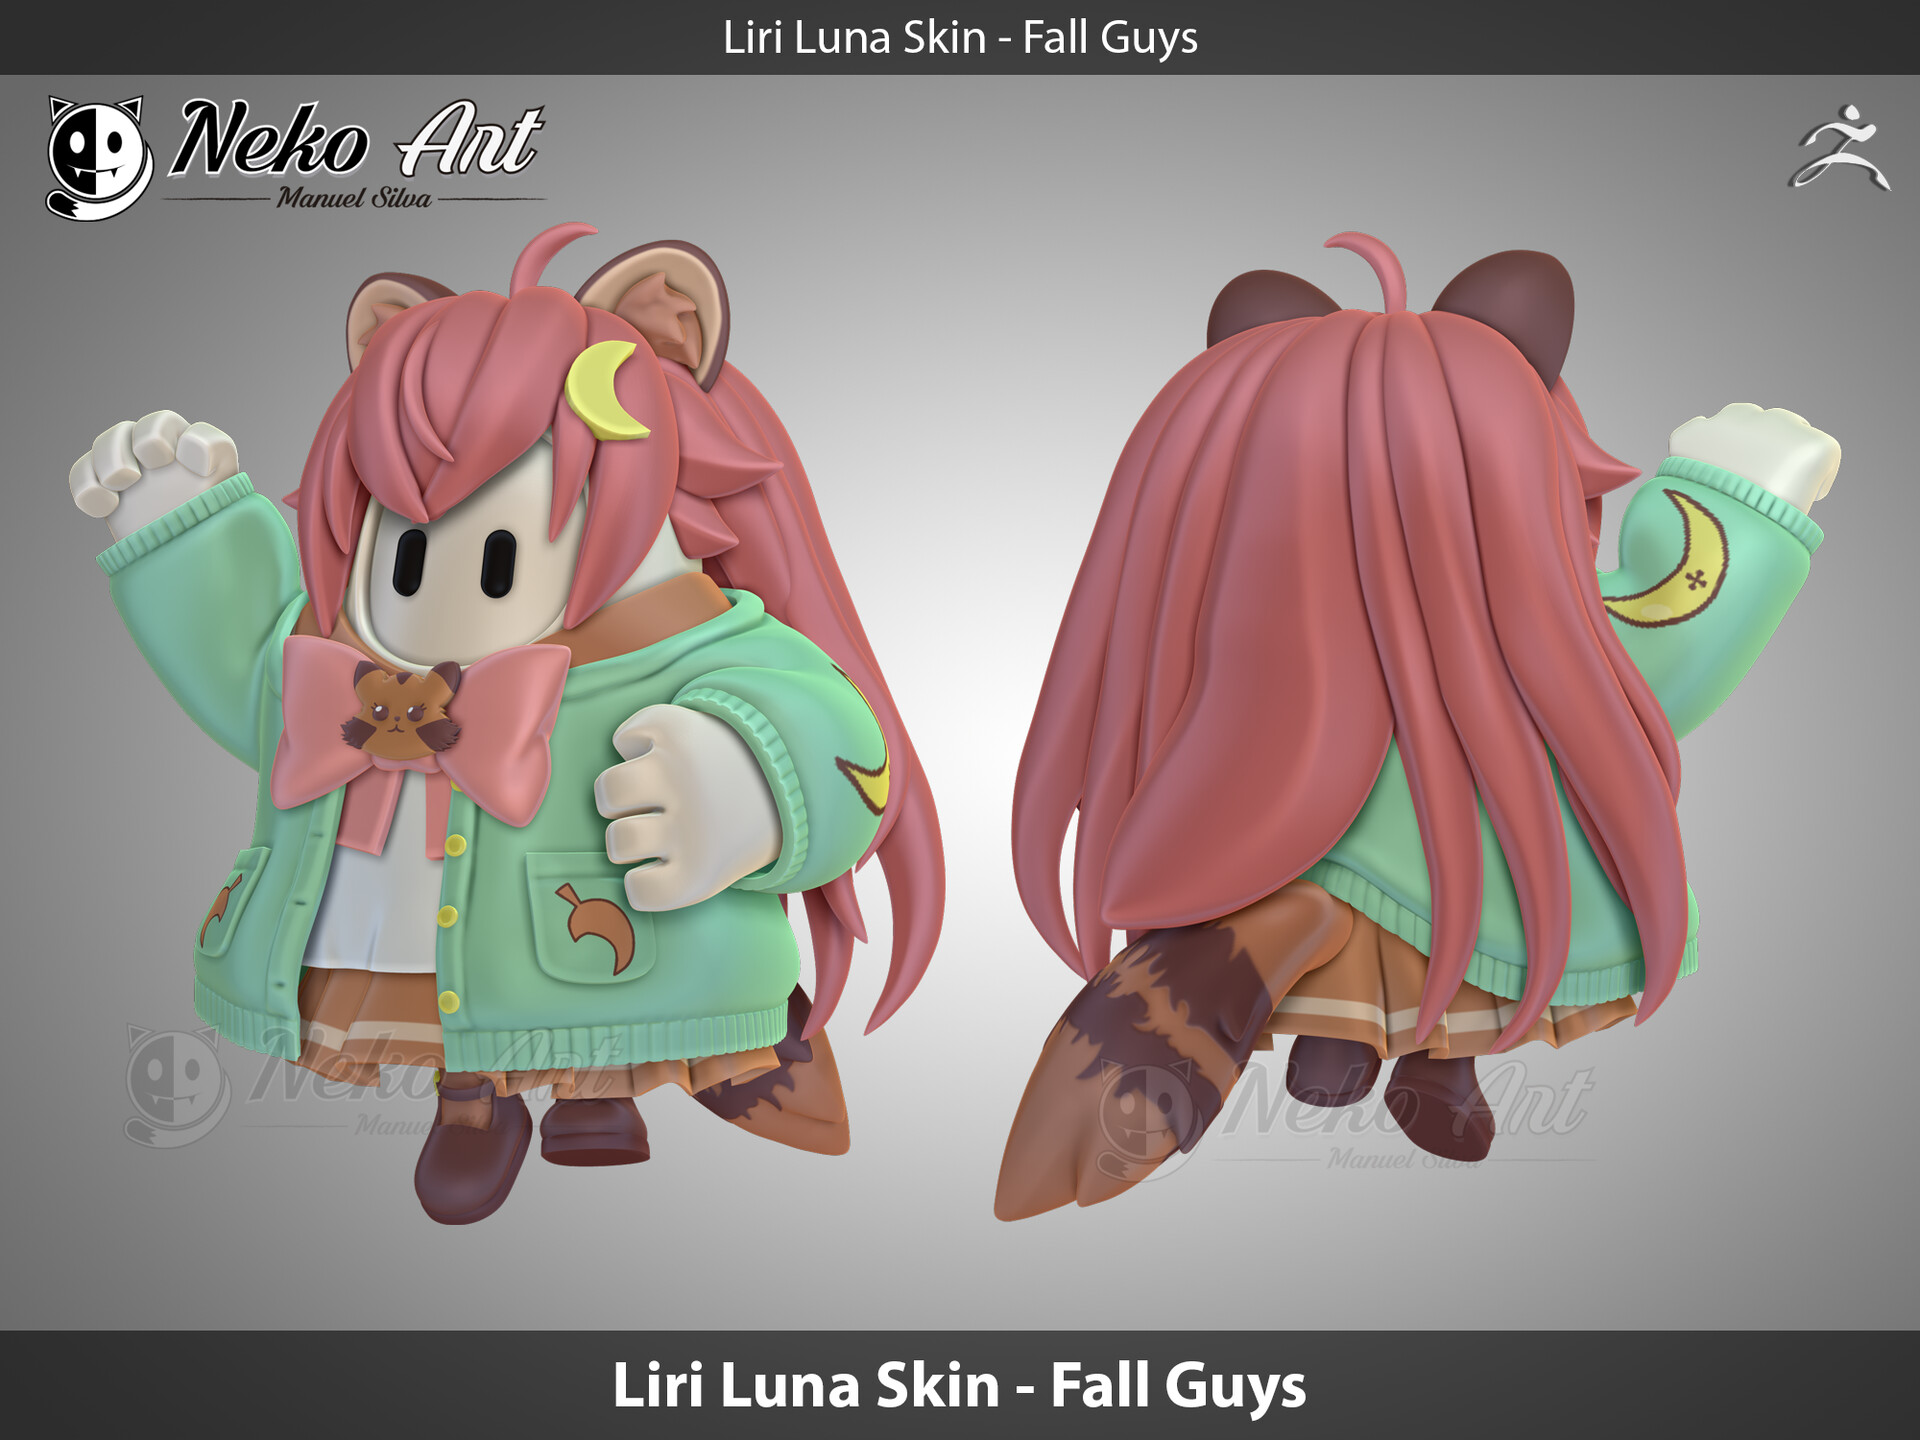 Fall Guys Adds Kizuna AI Outfit for a Limited Time - KeenGamer